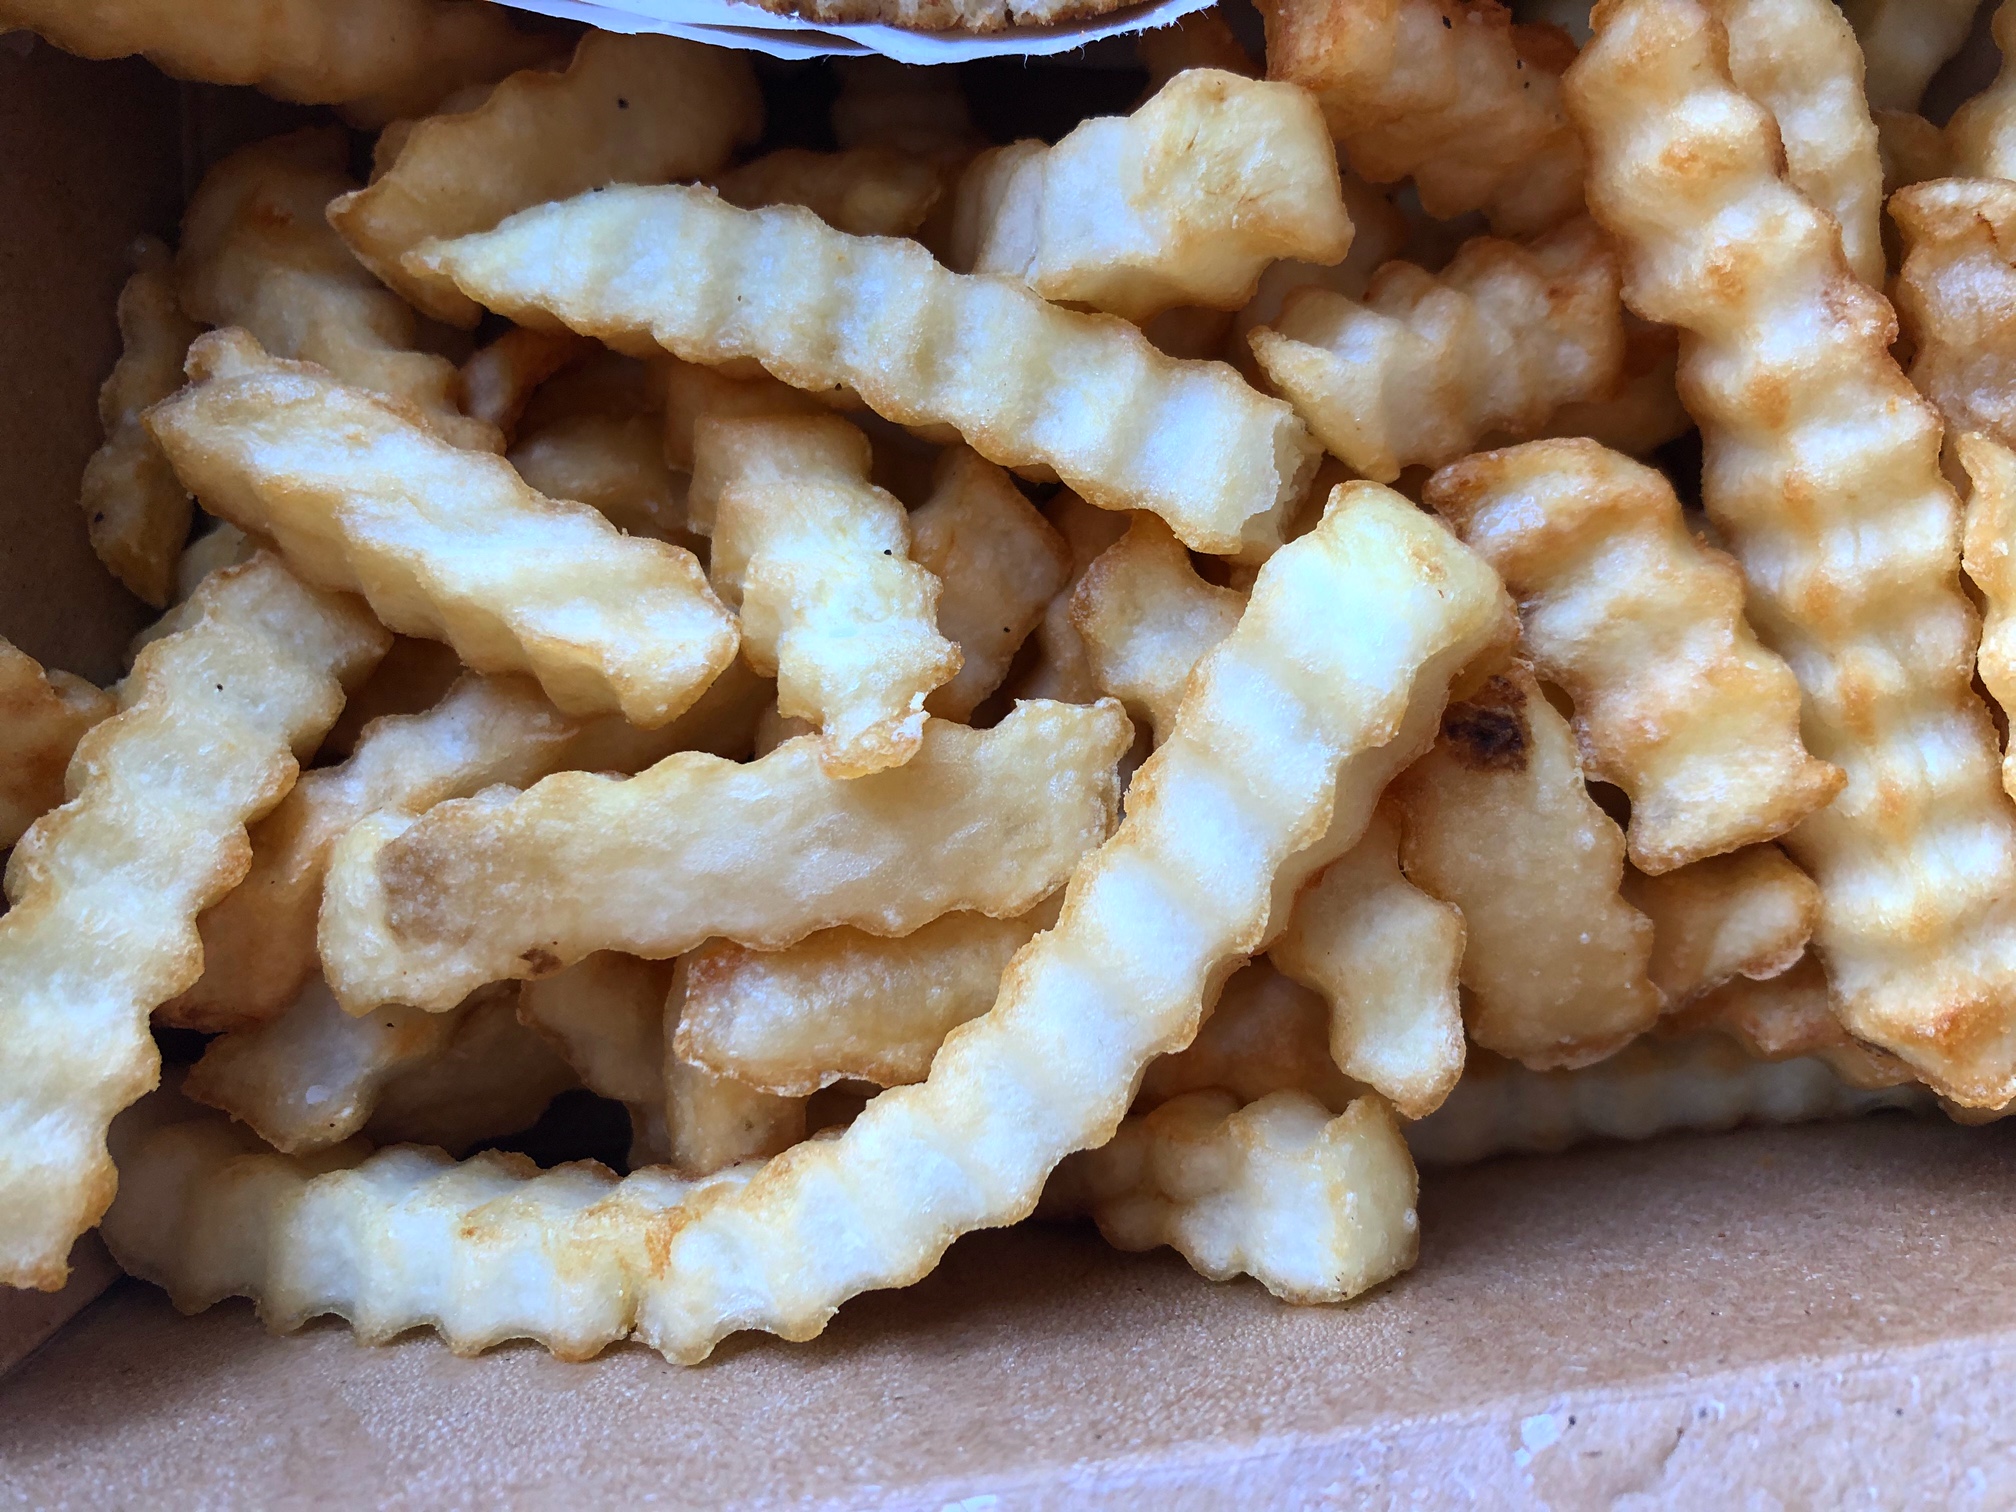 A close up photo of crinkle cut fries from La Royale in Urbana, Illinois. Photo by Alyssa Buckley.